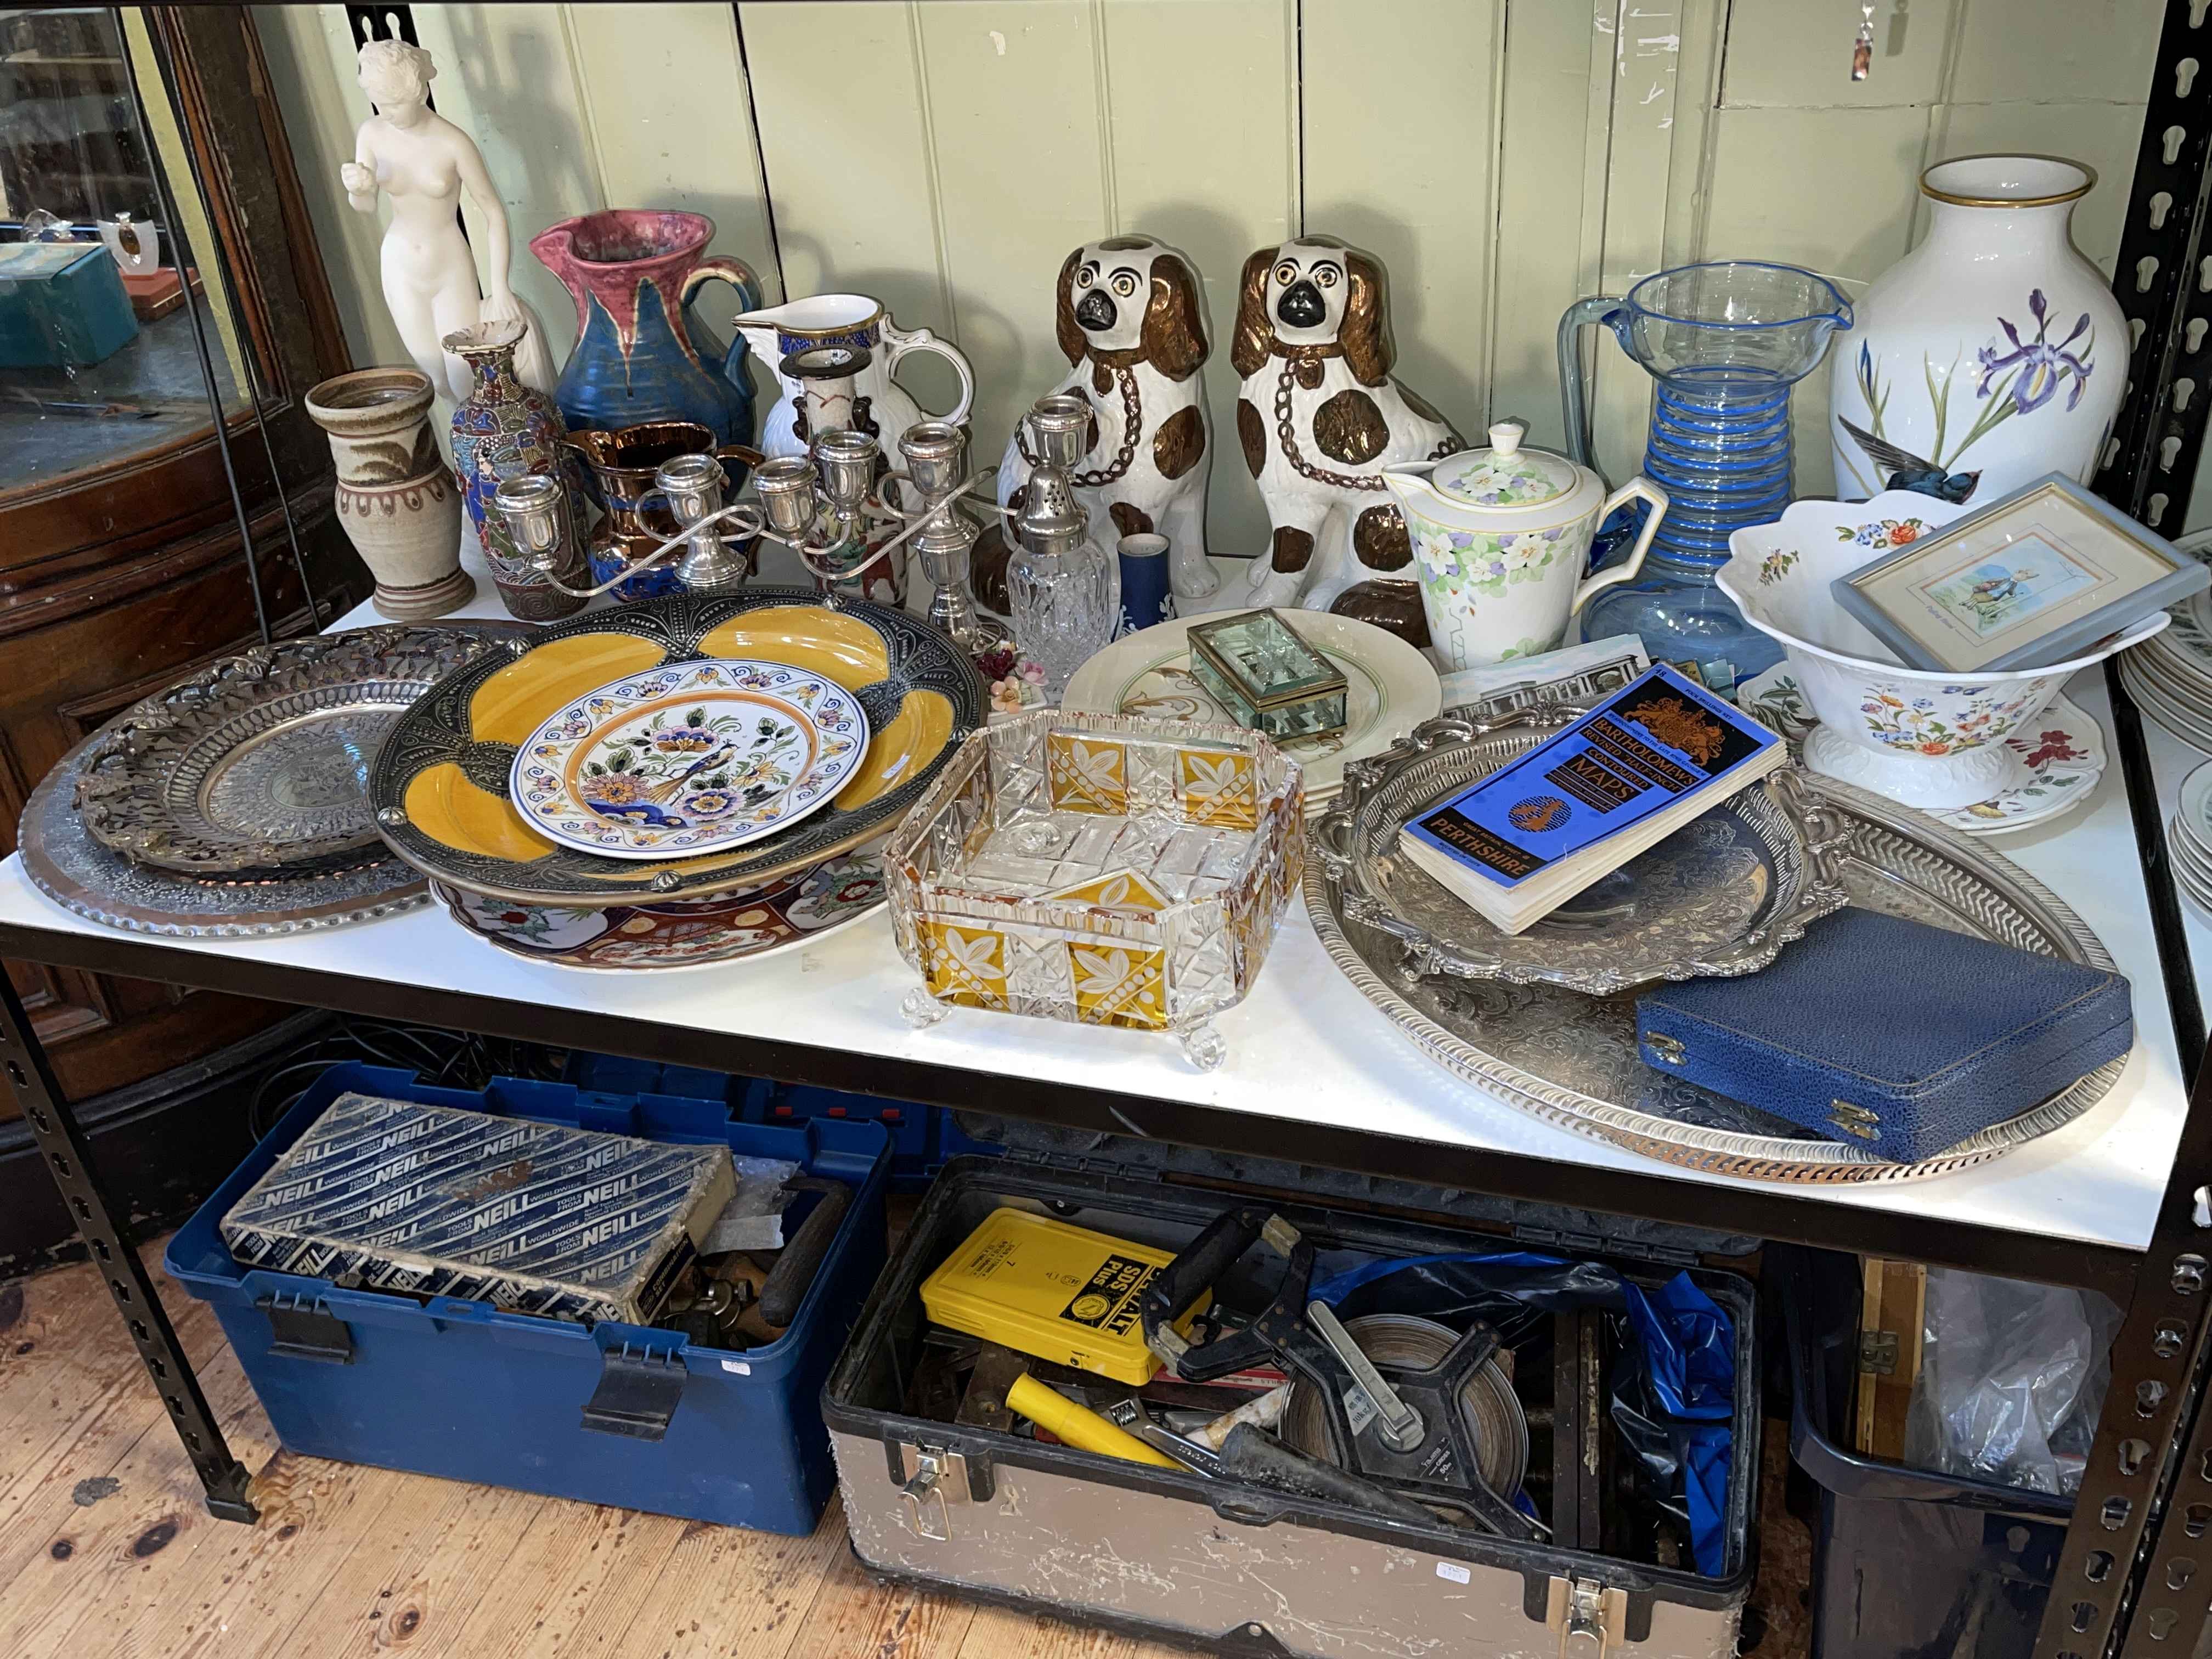 Collection of decorative pottery, lustre, Staffordshire dogs, metalwares, etc.